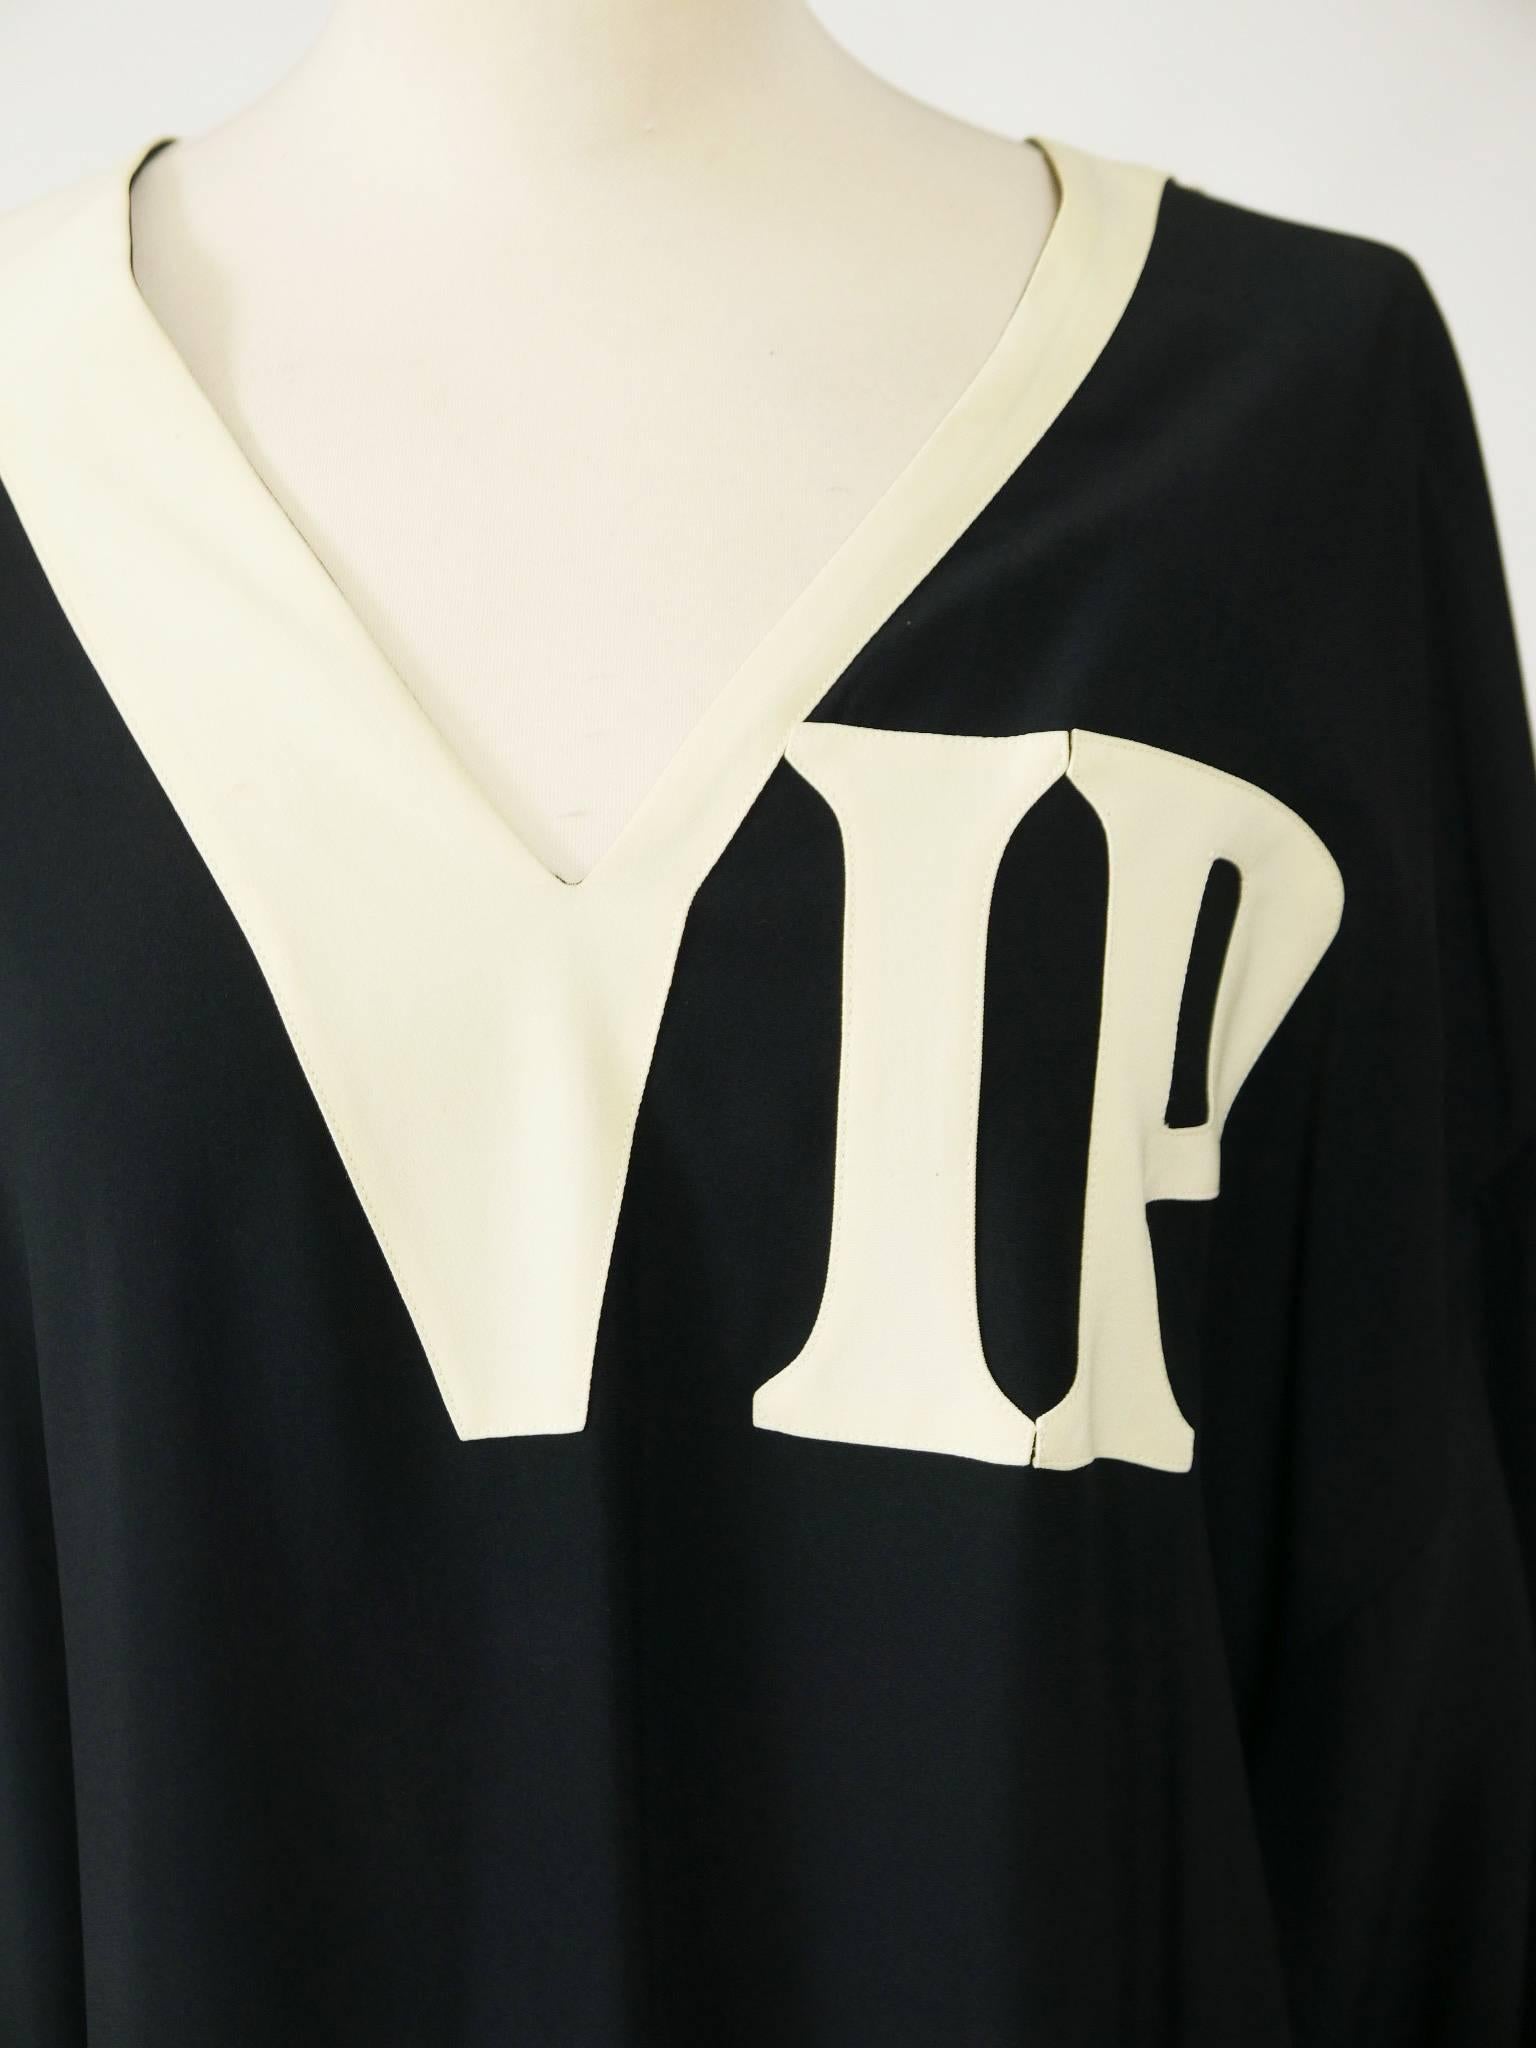 1990s MOSCHINO Couture VIP Football Jersey Blouse 1